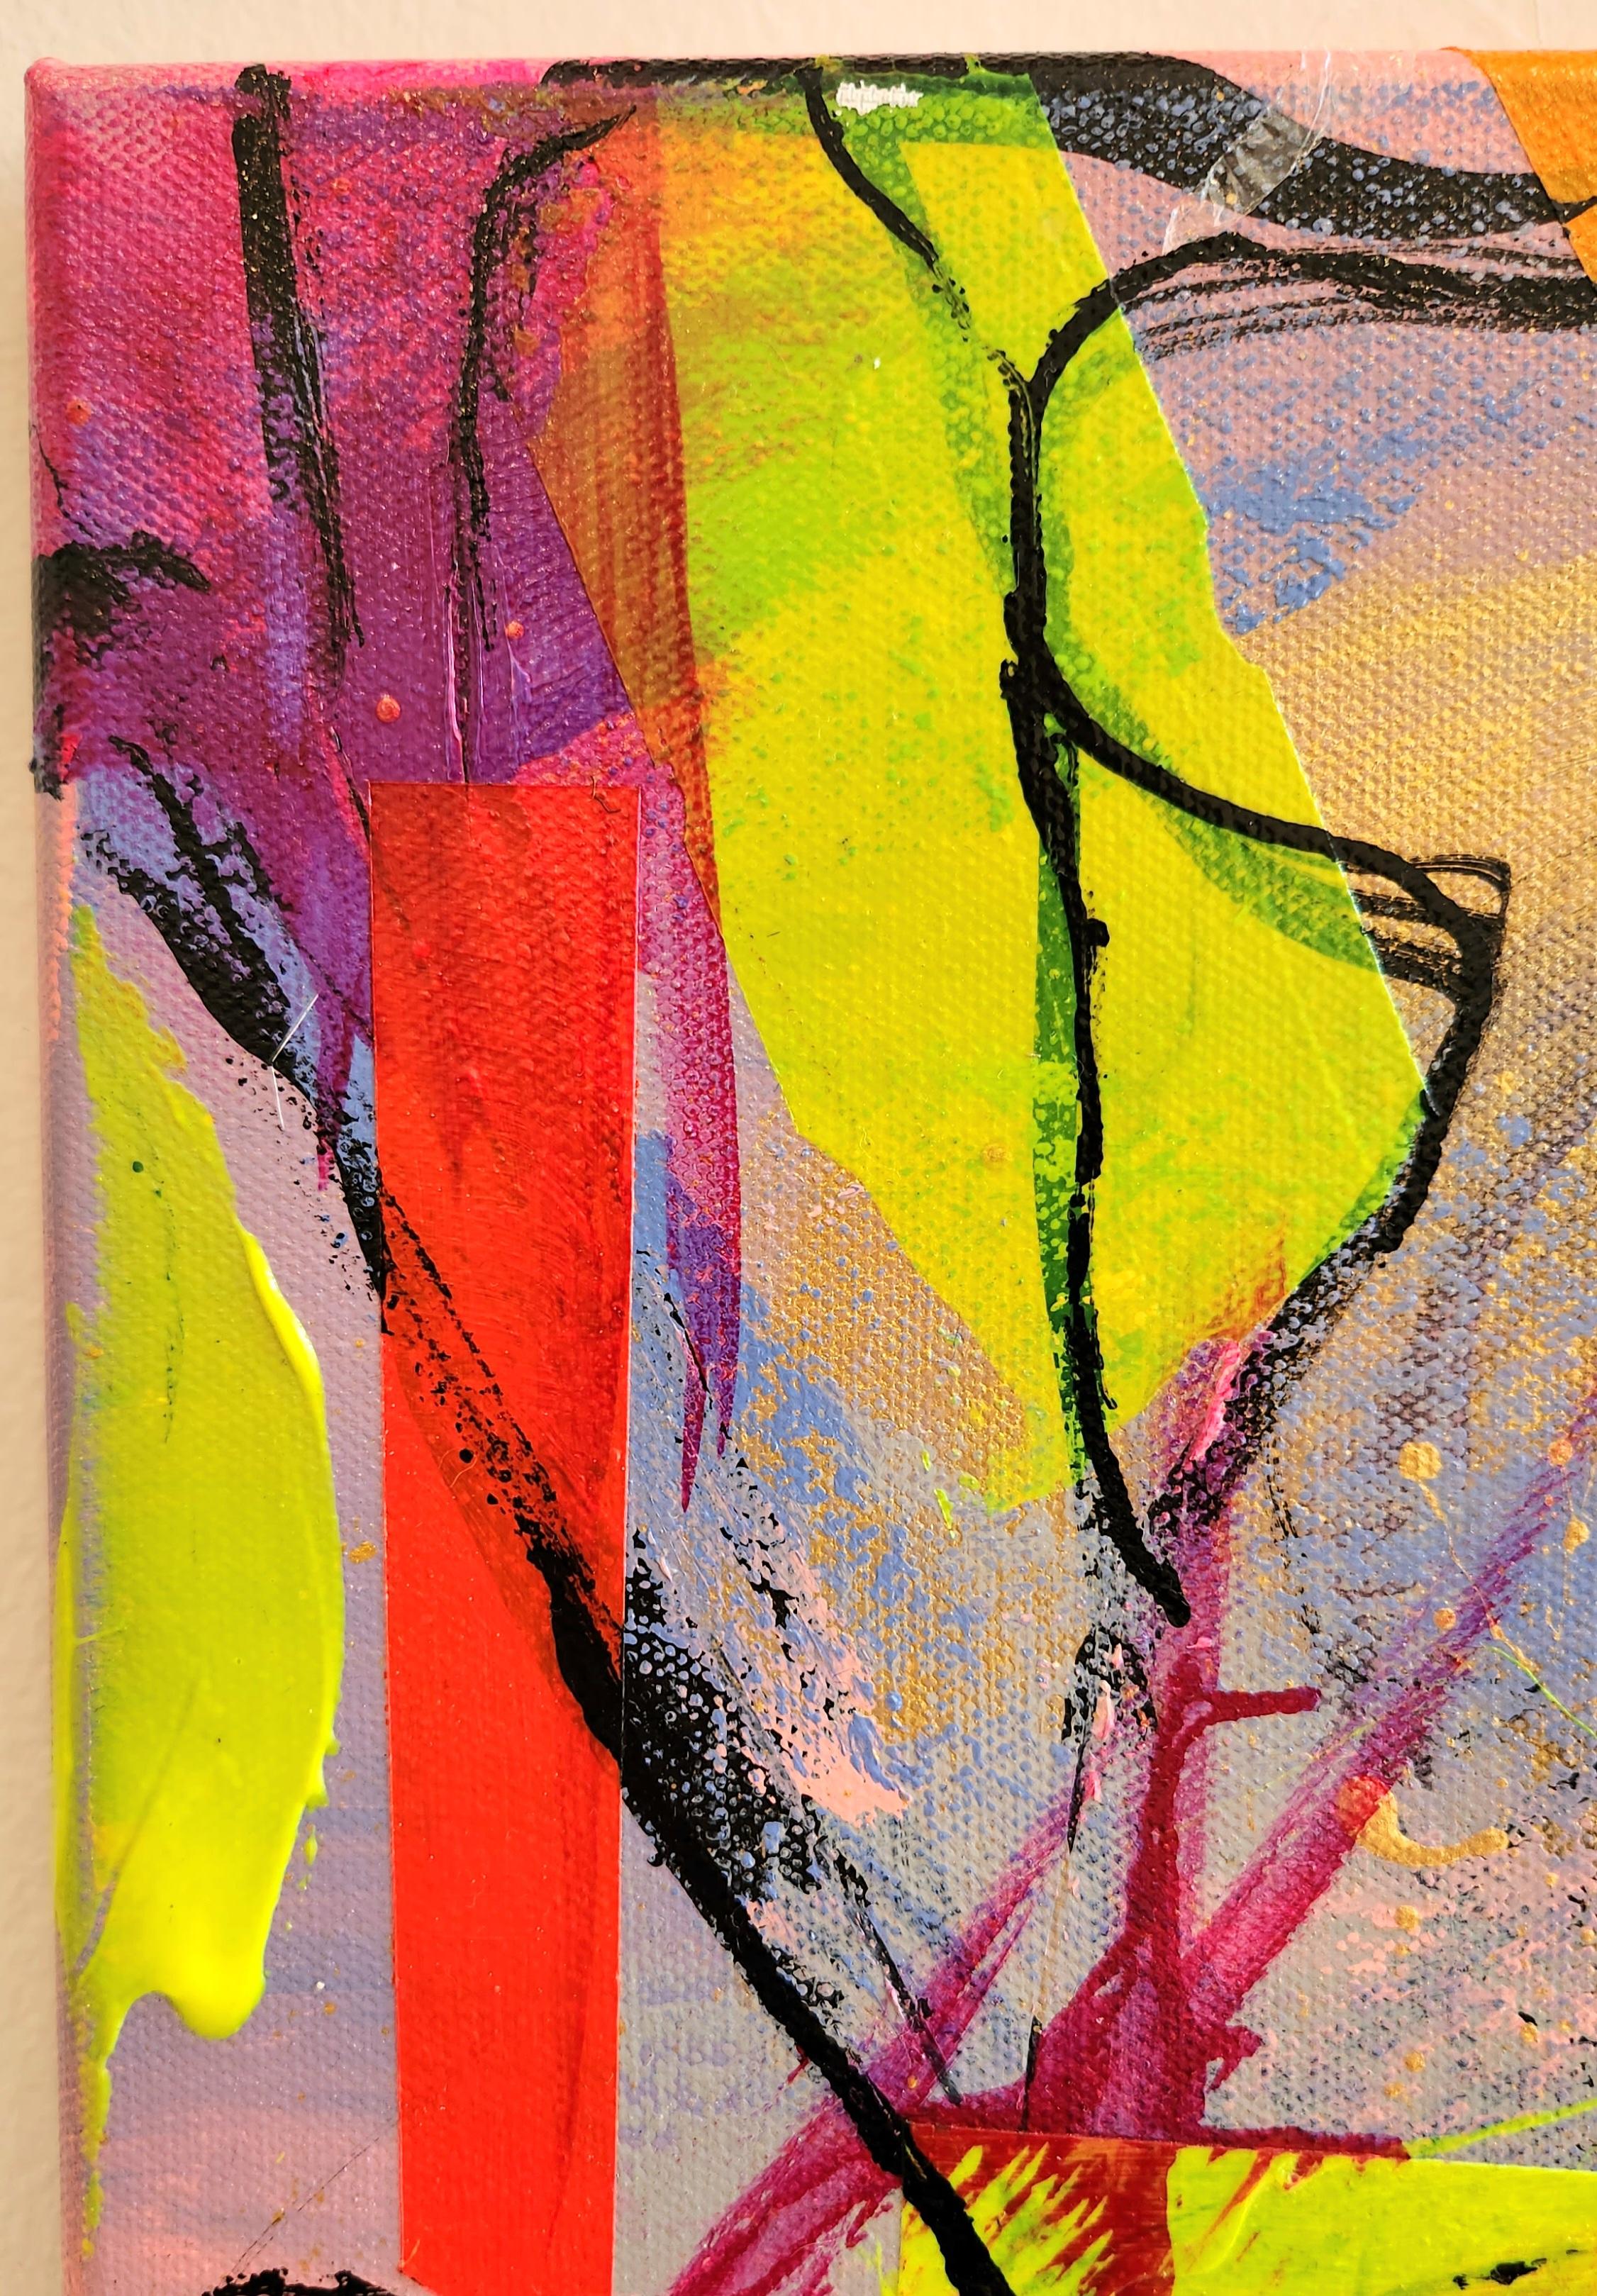 This abstract acrylic painting is an exciting piece that is characterized by a variety of bright pinks, yellows, oranges, and blues. The palette of this piece creates a sense of energy and joy, emphasized by the colorful squares and black marks